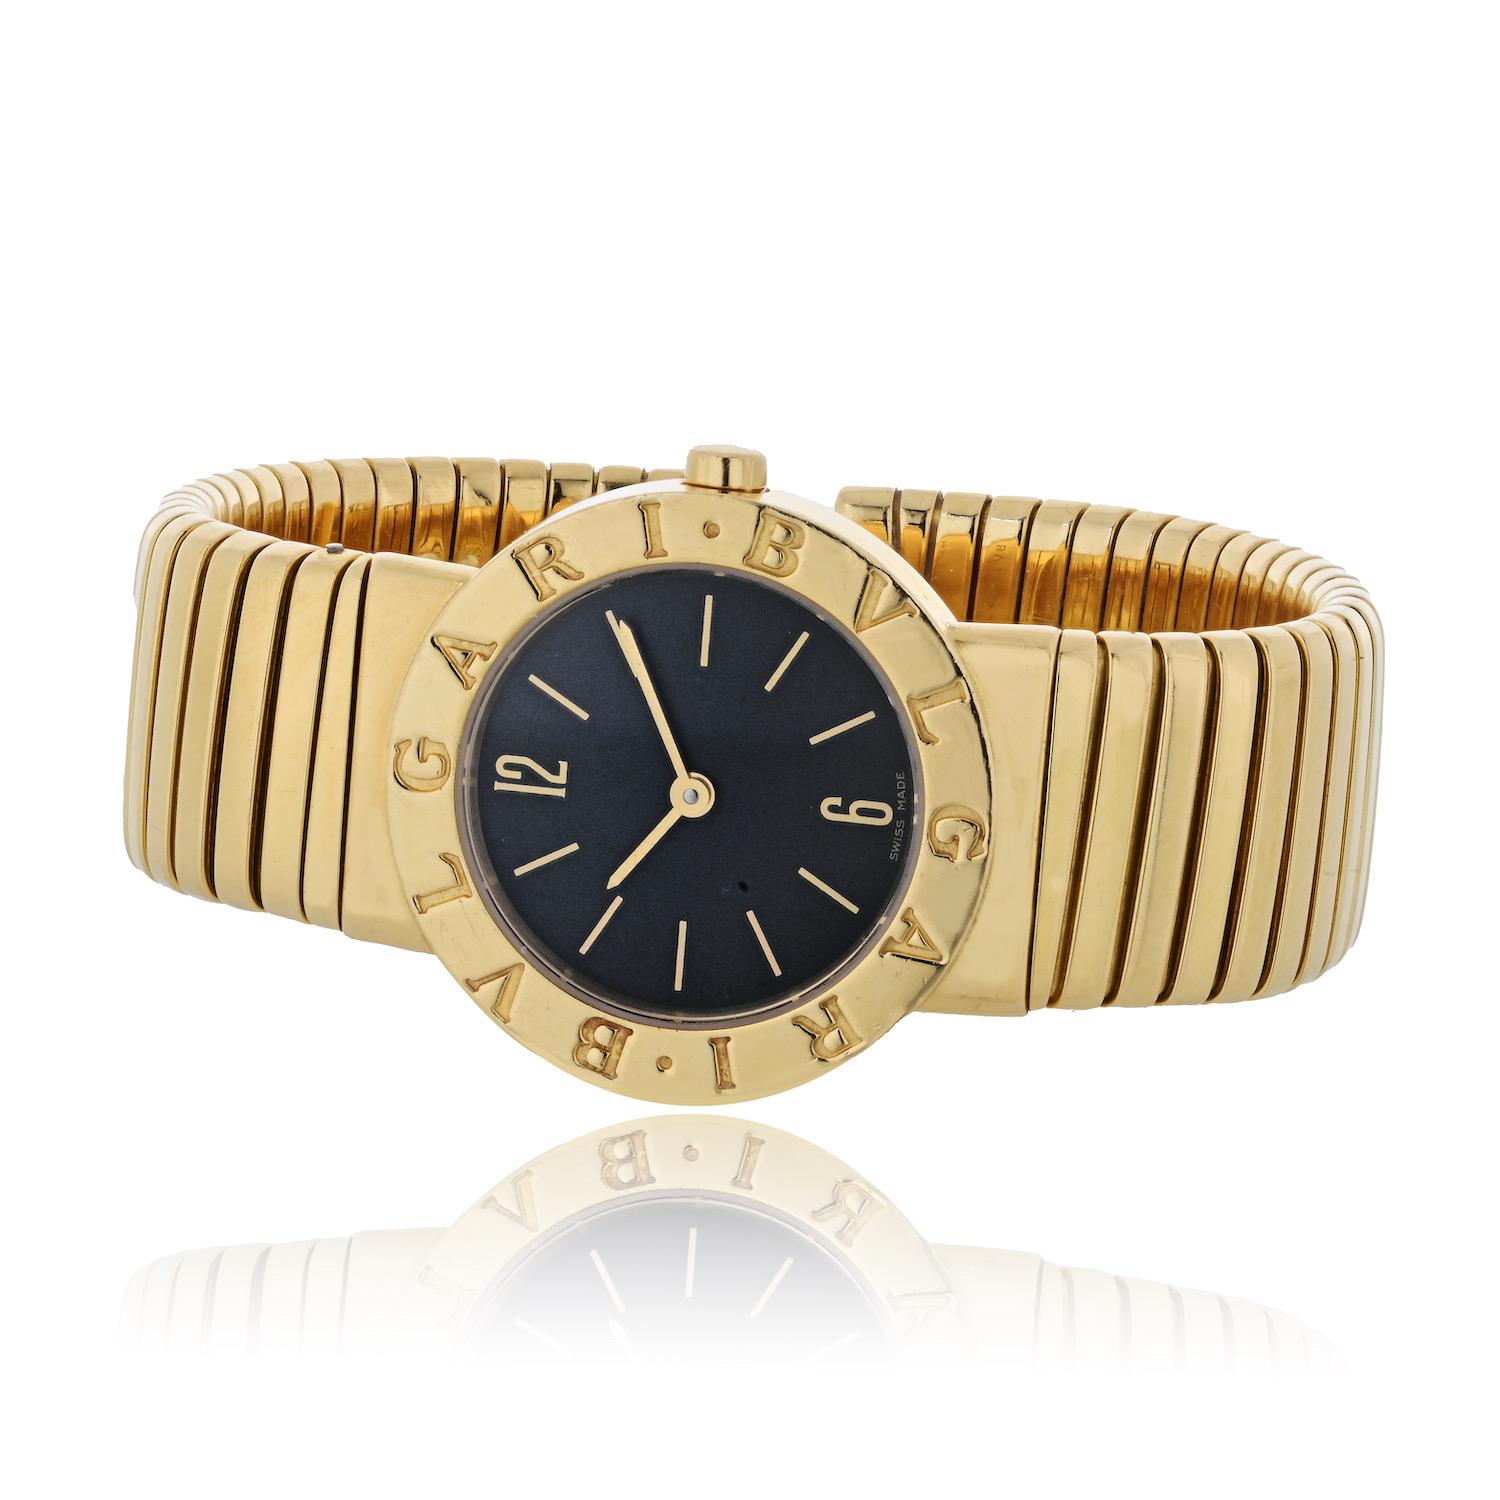 Indulge in the timeless allure of the Bulgari Tubogas Yellow Gold Bracelet Black 26mm Dial Vintage Ladies Watch, model BB262T, a captivating timepiece that seamlessly merges sophistication with vintage charm. This signature Bulgari creation features